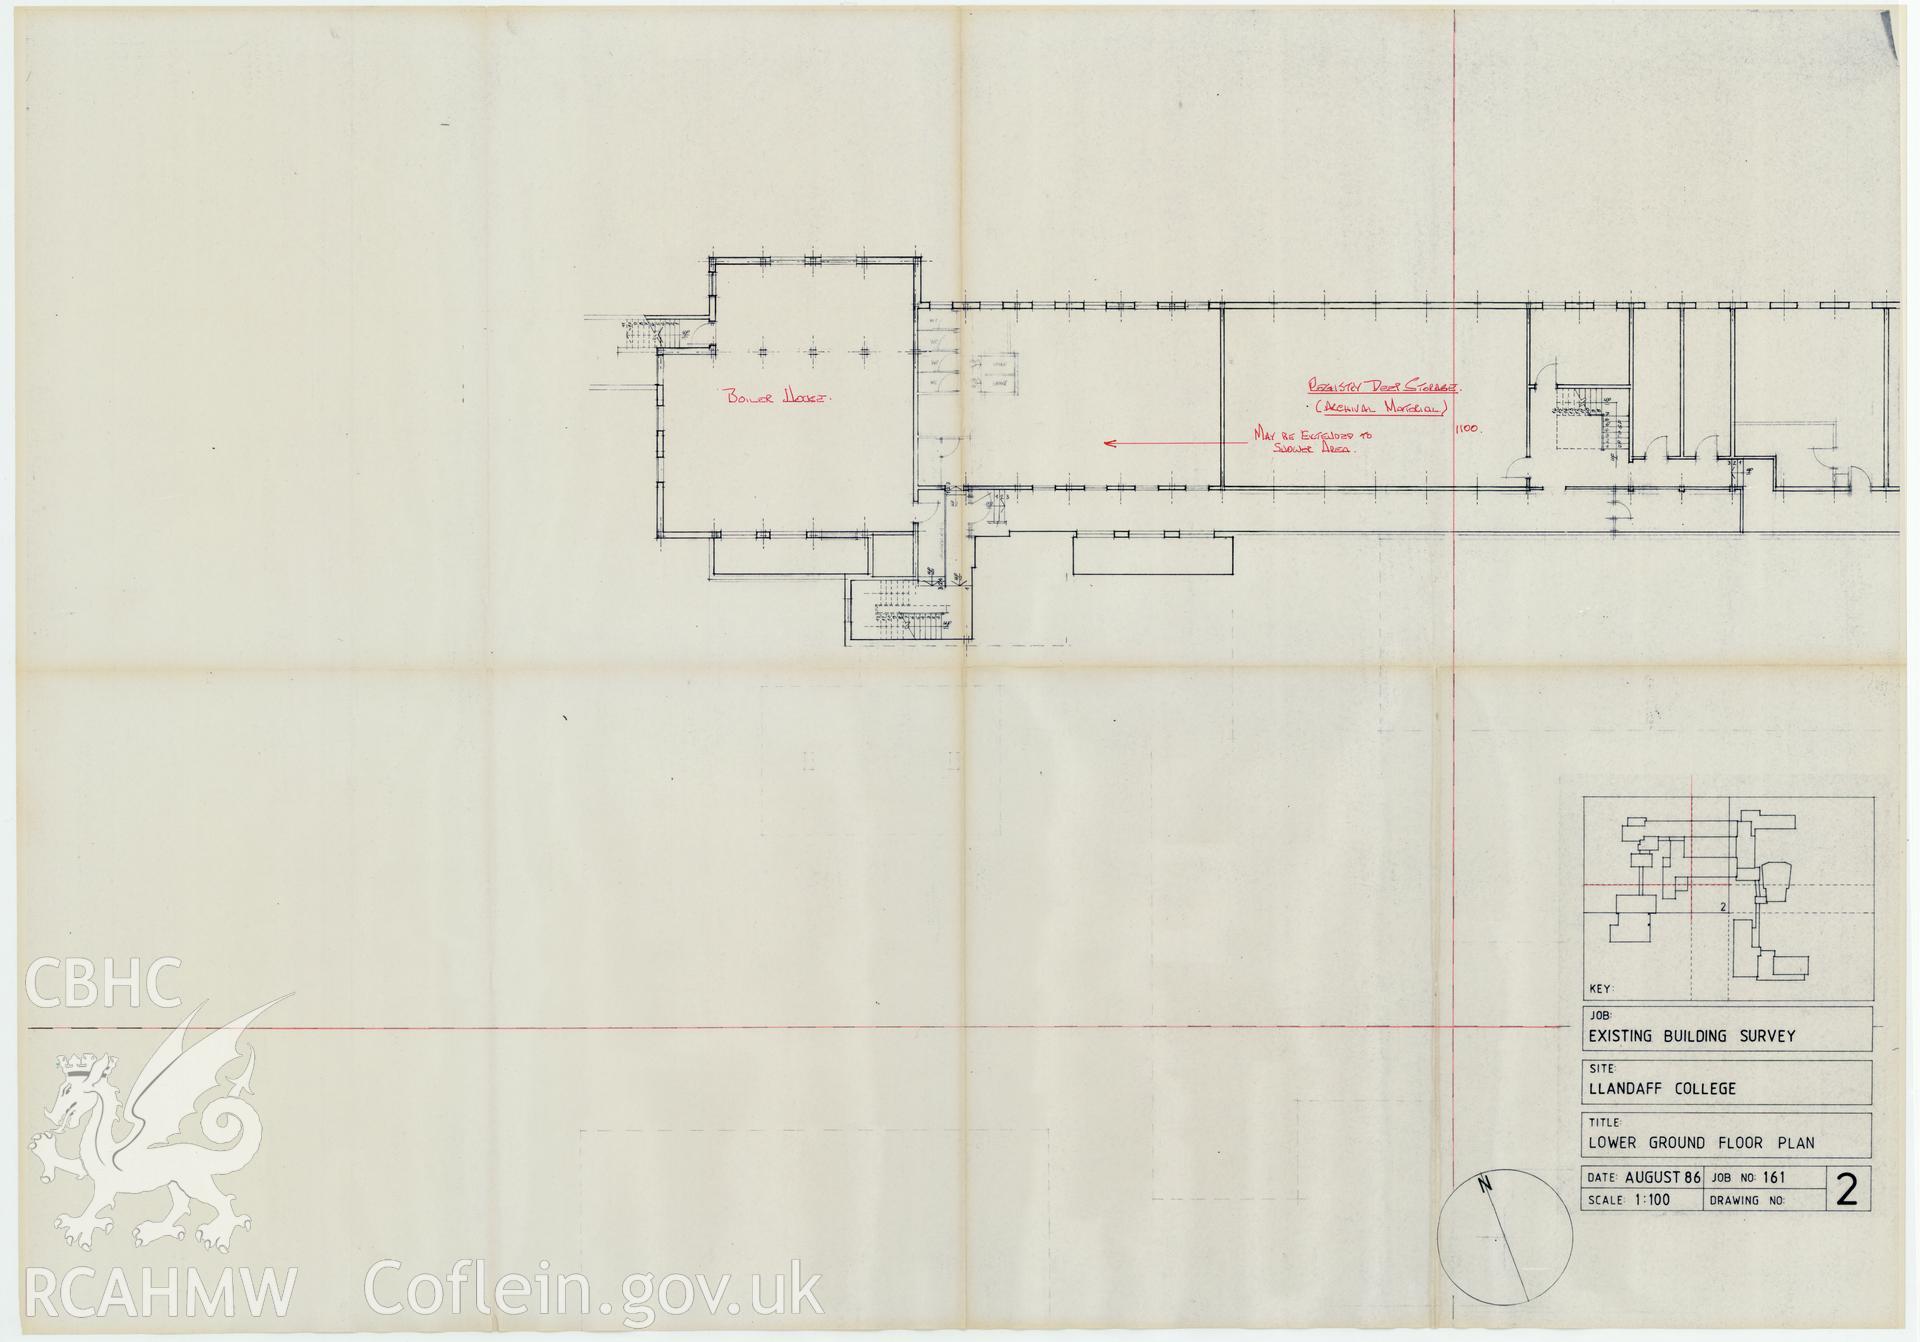 Plan of the lower ground floor of Llandaff College, Cardiff. The existing building survey, August 1986, No 2.